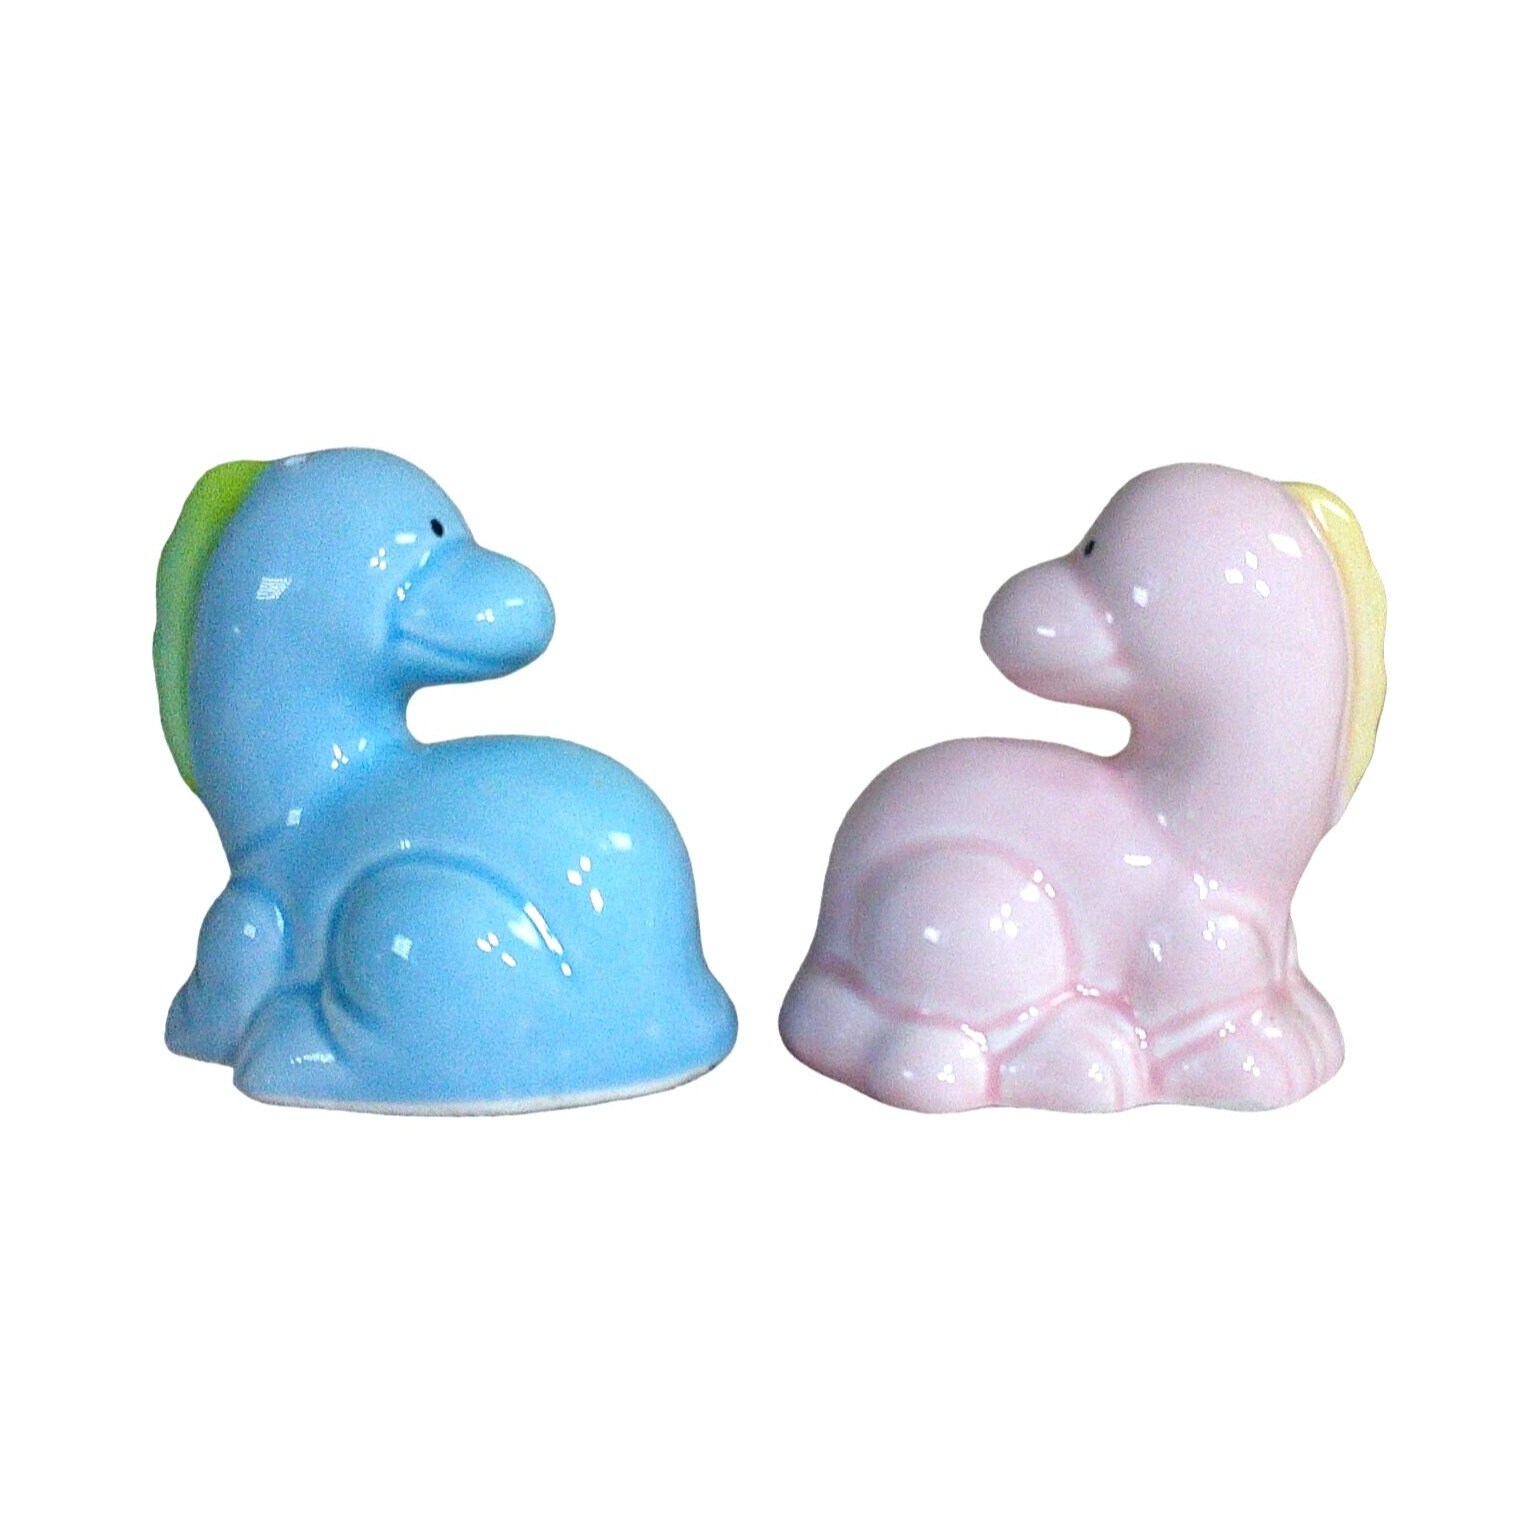 D Battery Salt and Pepper Shakers  Stuffed peppers, Salt and pepper set,  Fred & friends